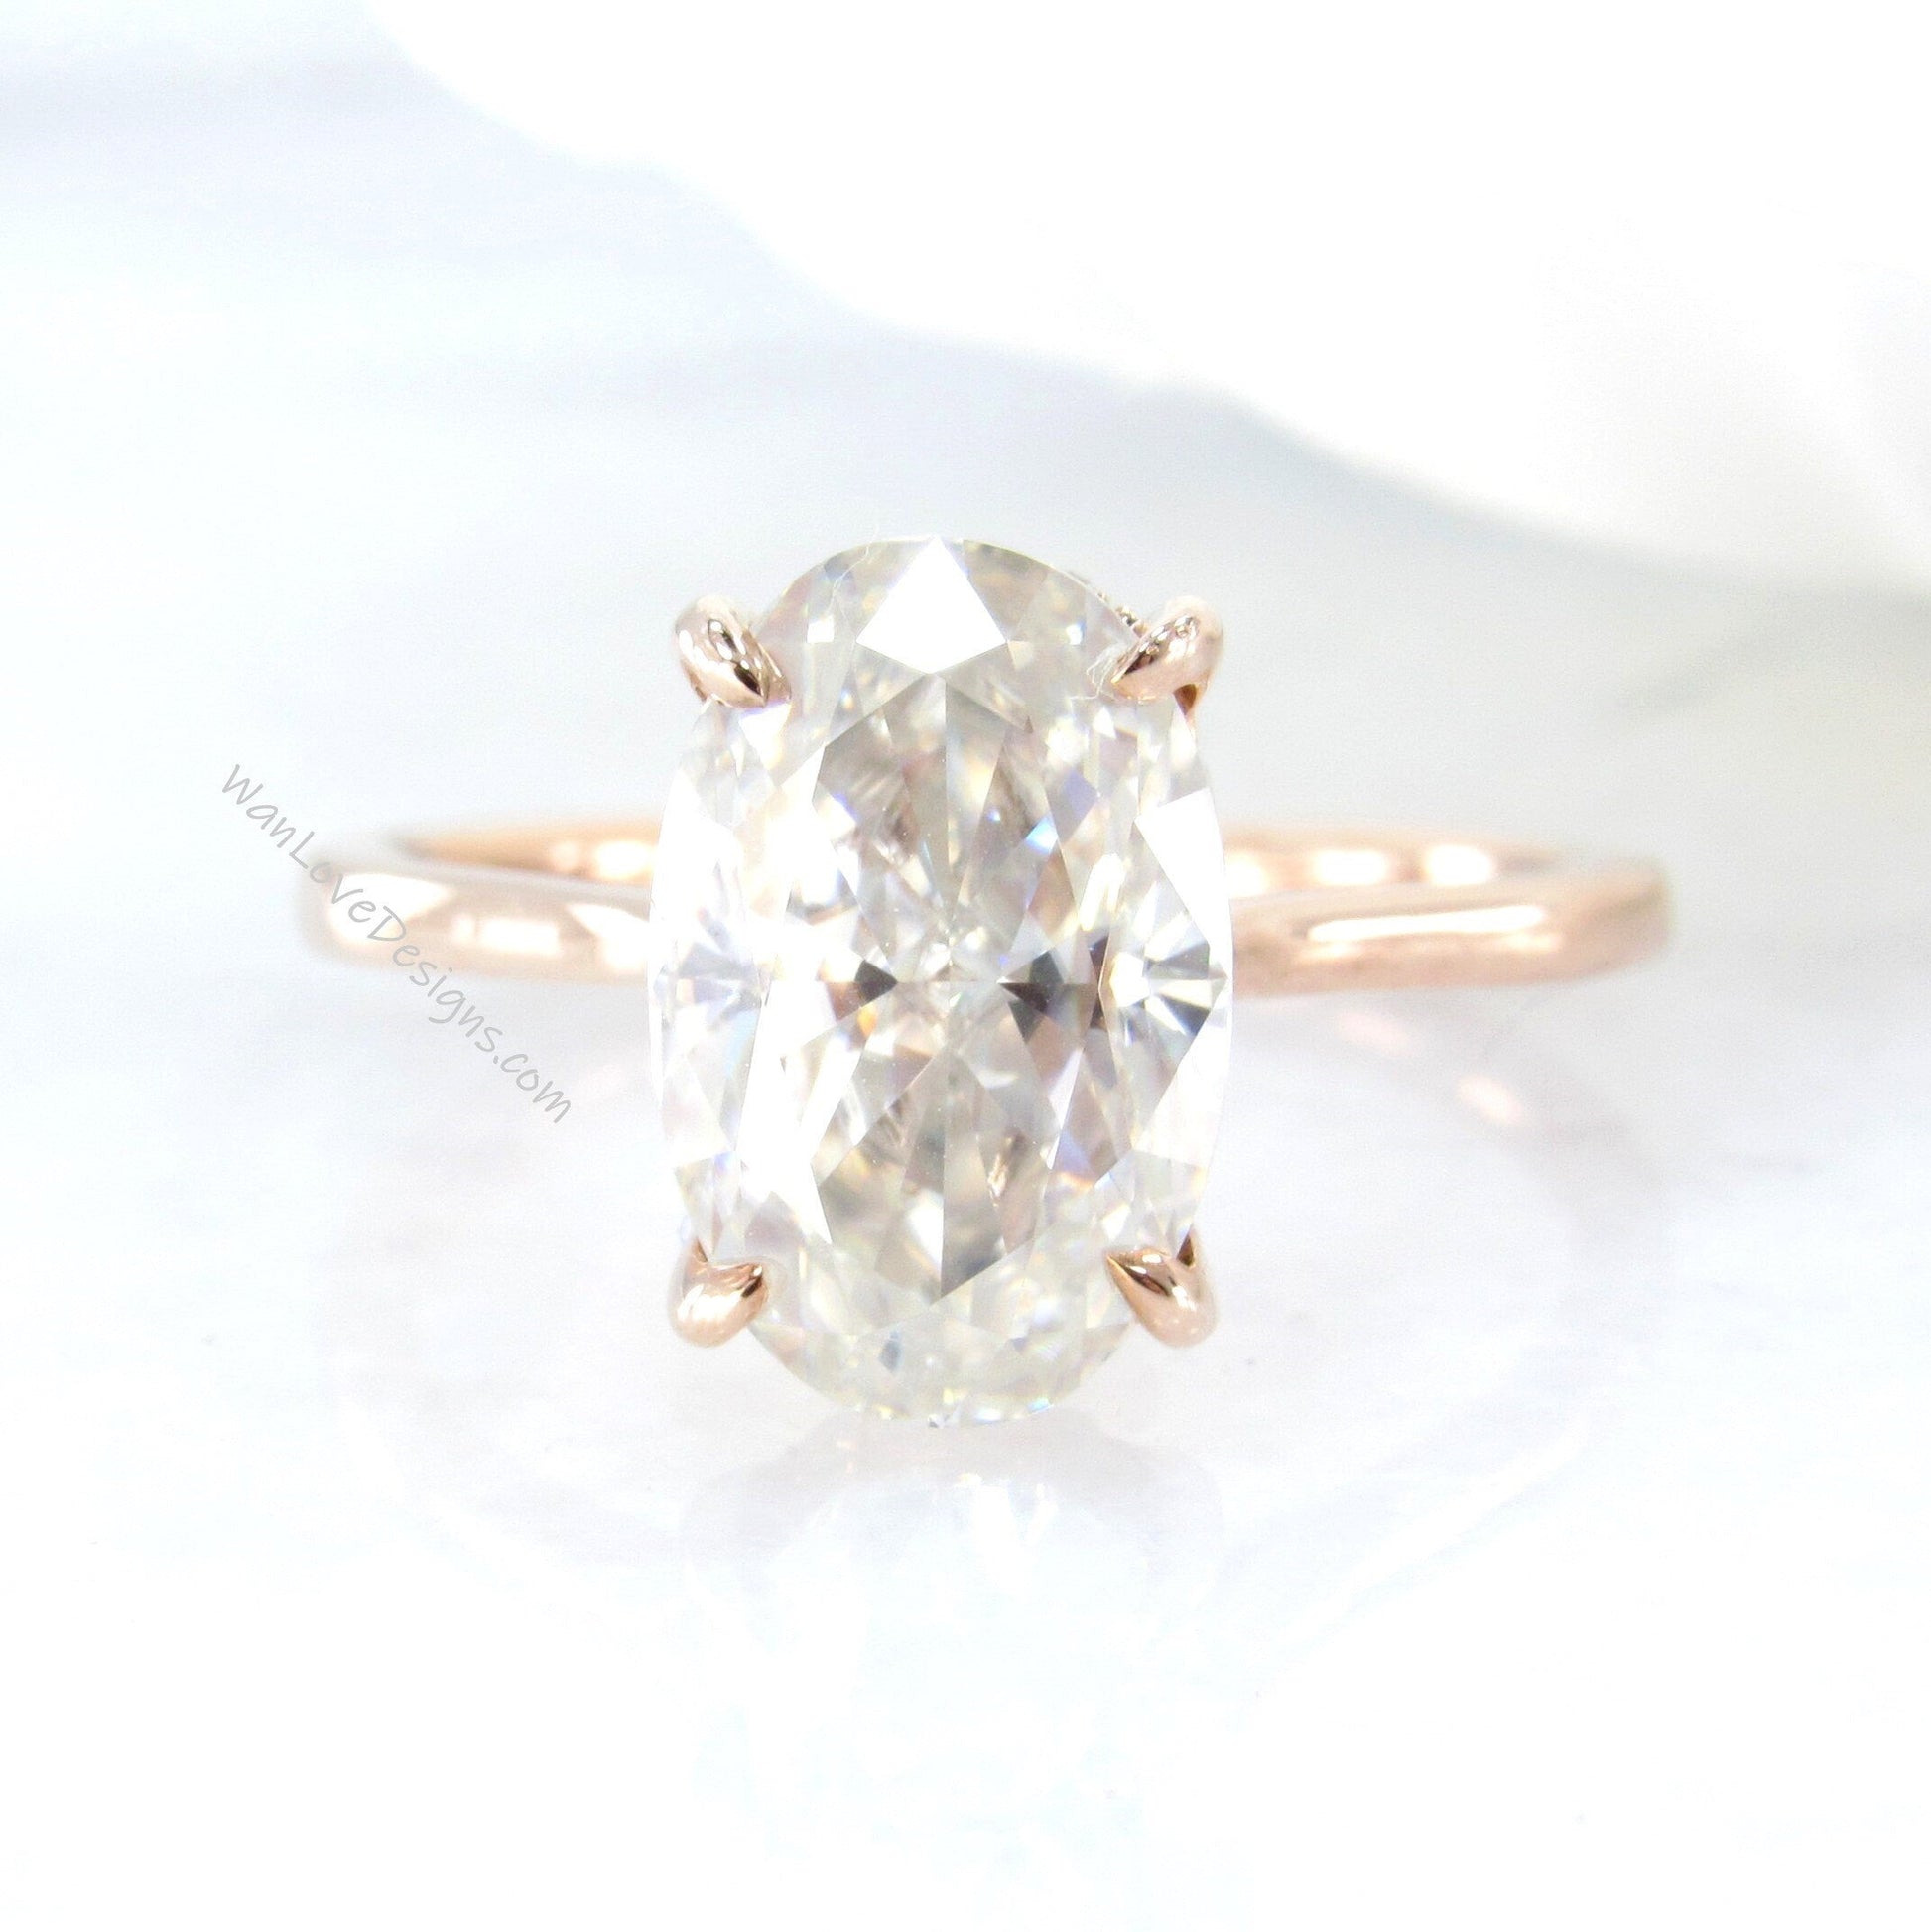 Oval cut Moissanite engagement ring 4 prong Solitaire tapered ring rose gold ring vintage ring art deco ring moissanite promise ring gift Wan Love Designs